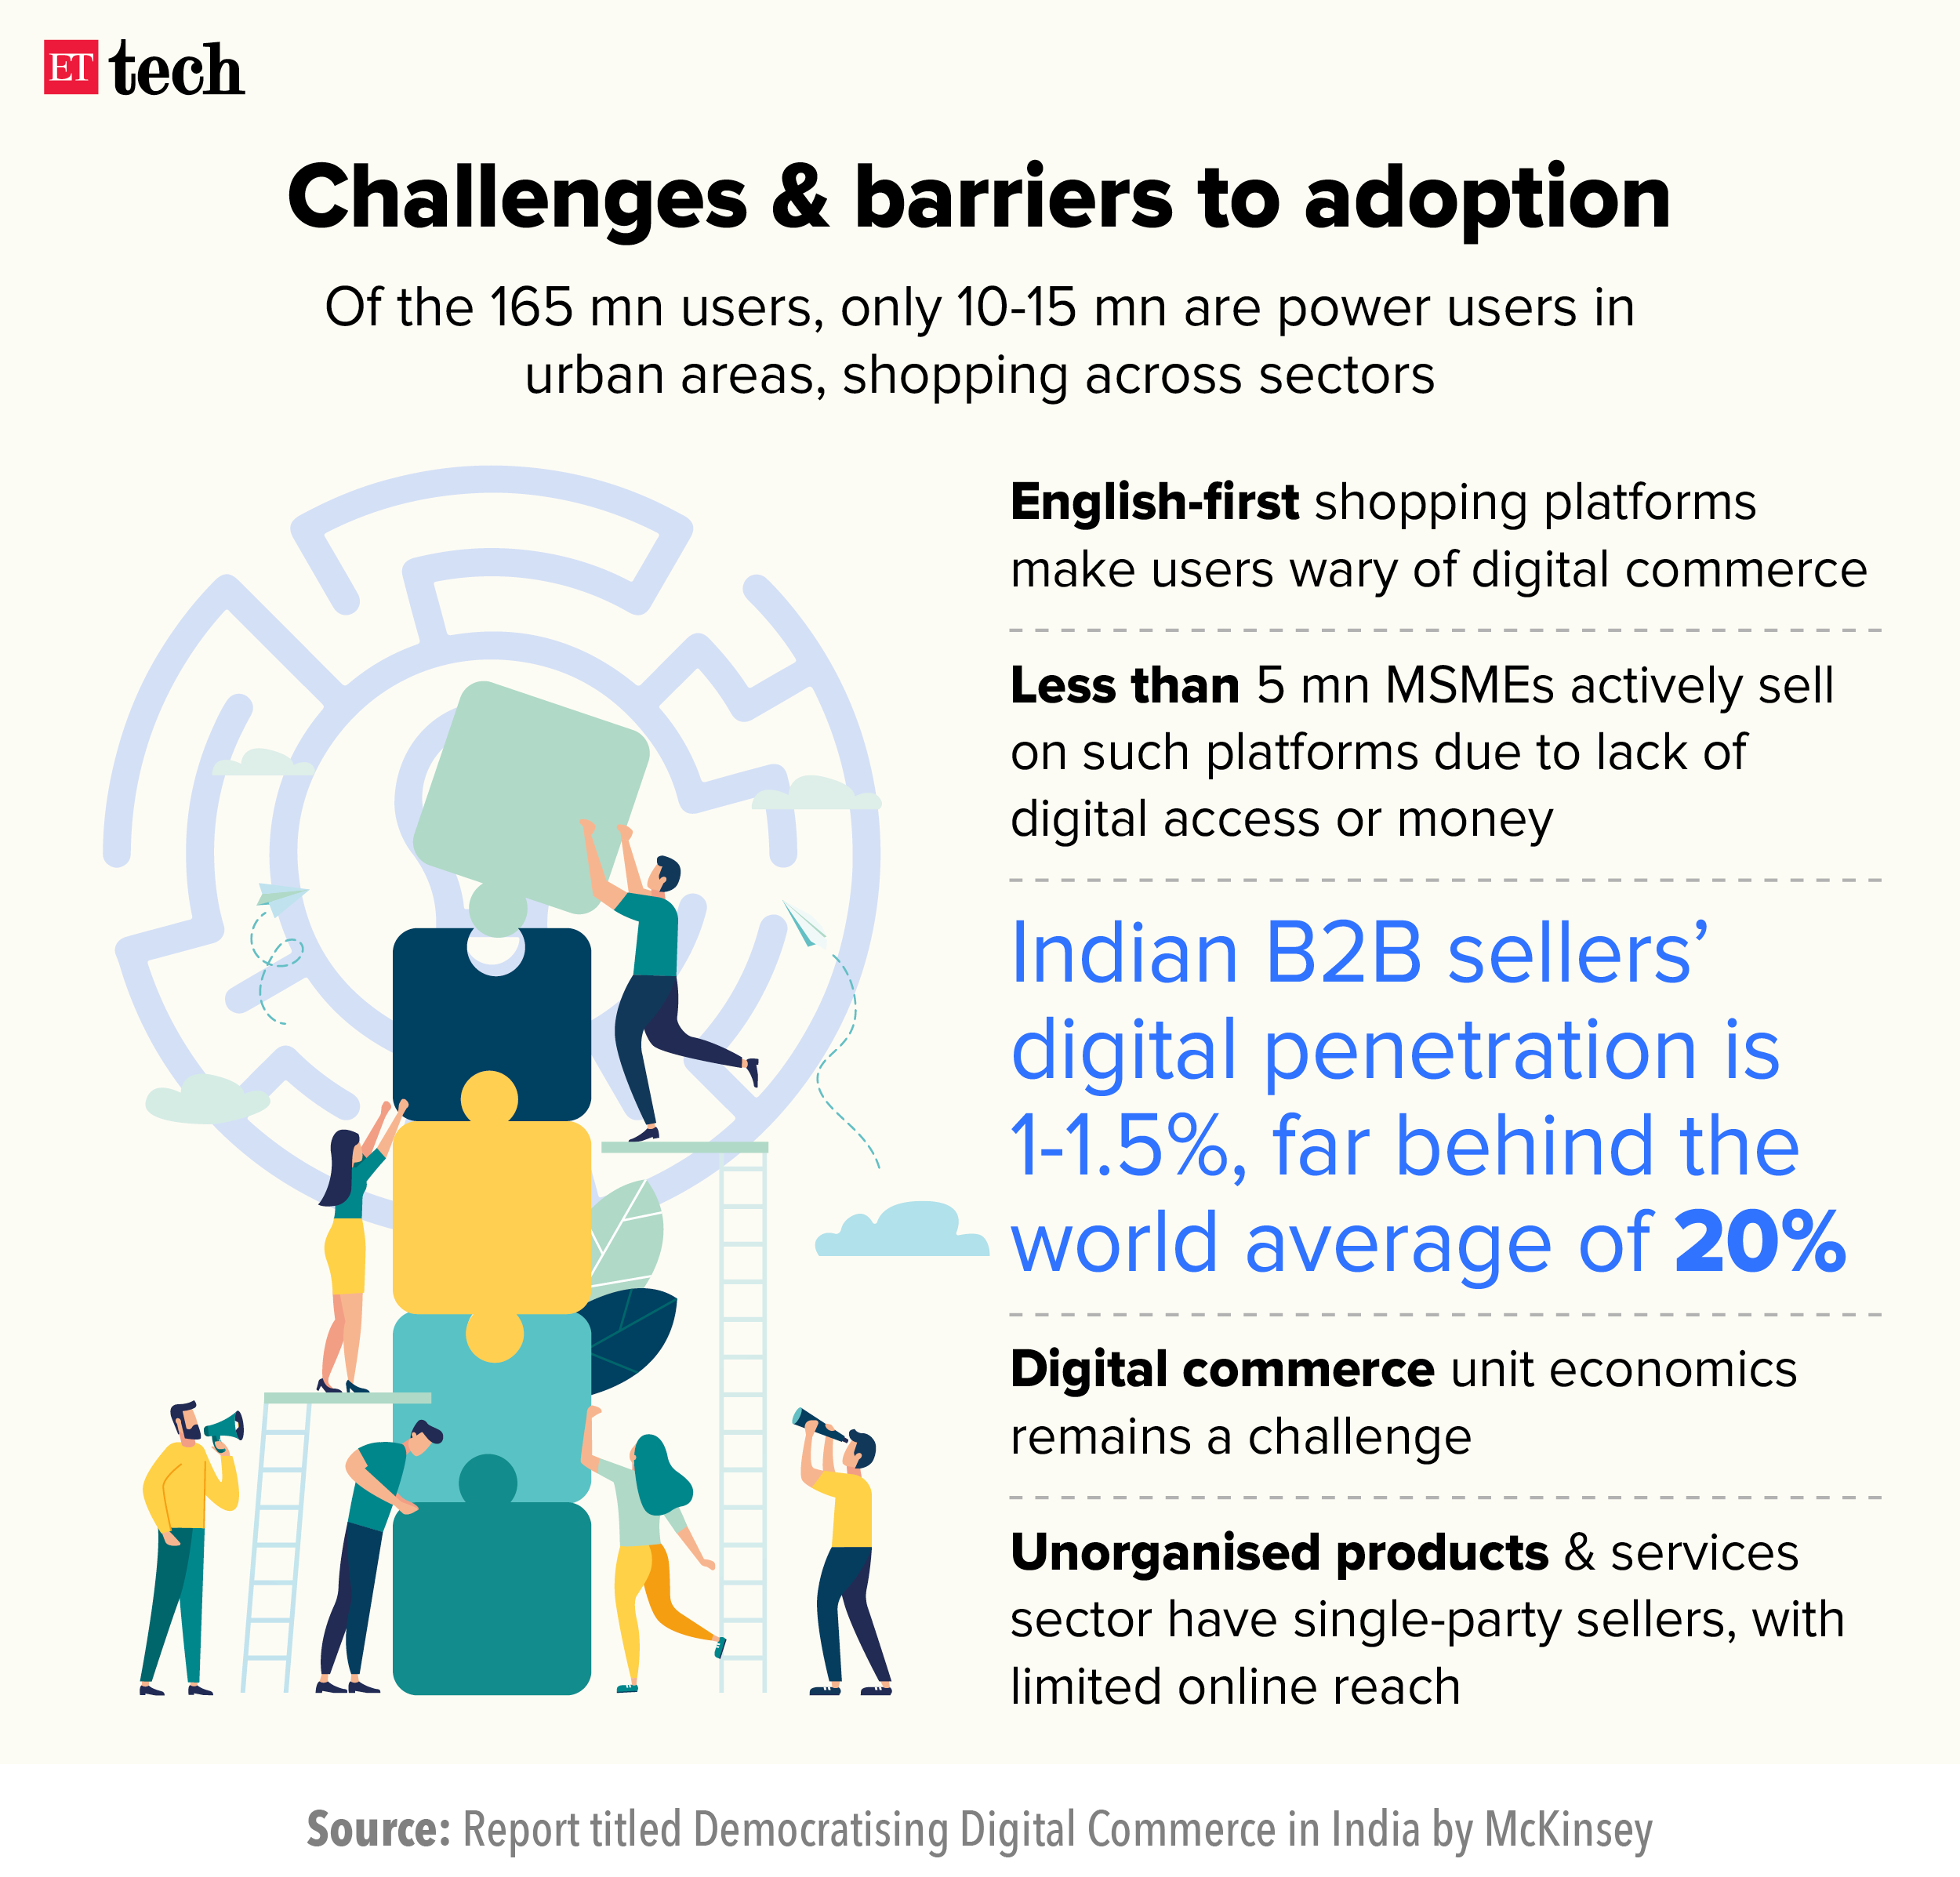 Challenges barriers to adoption_Graphic_ETTECH